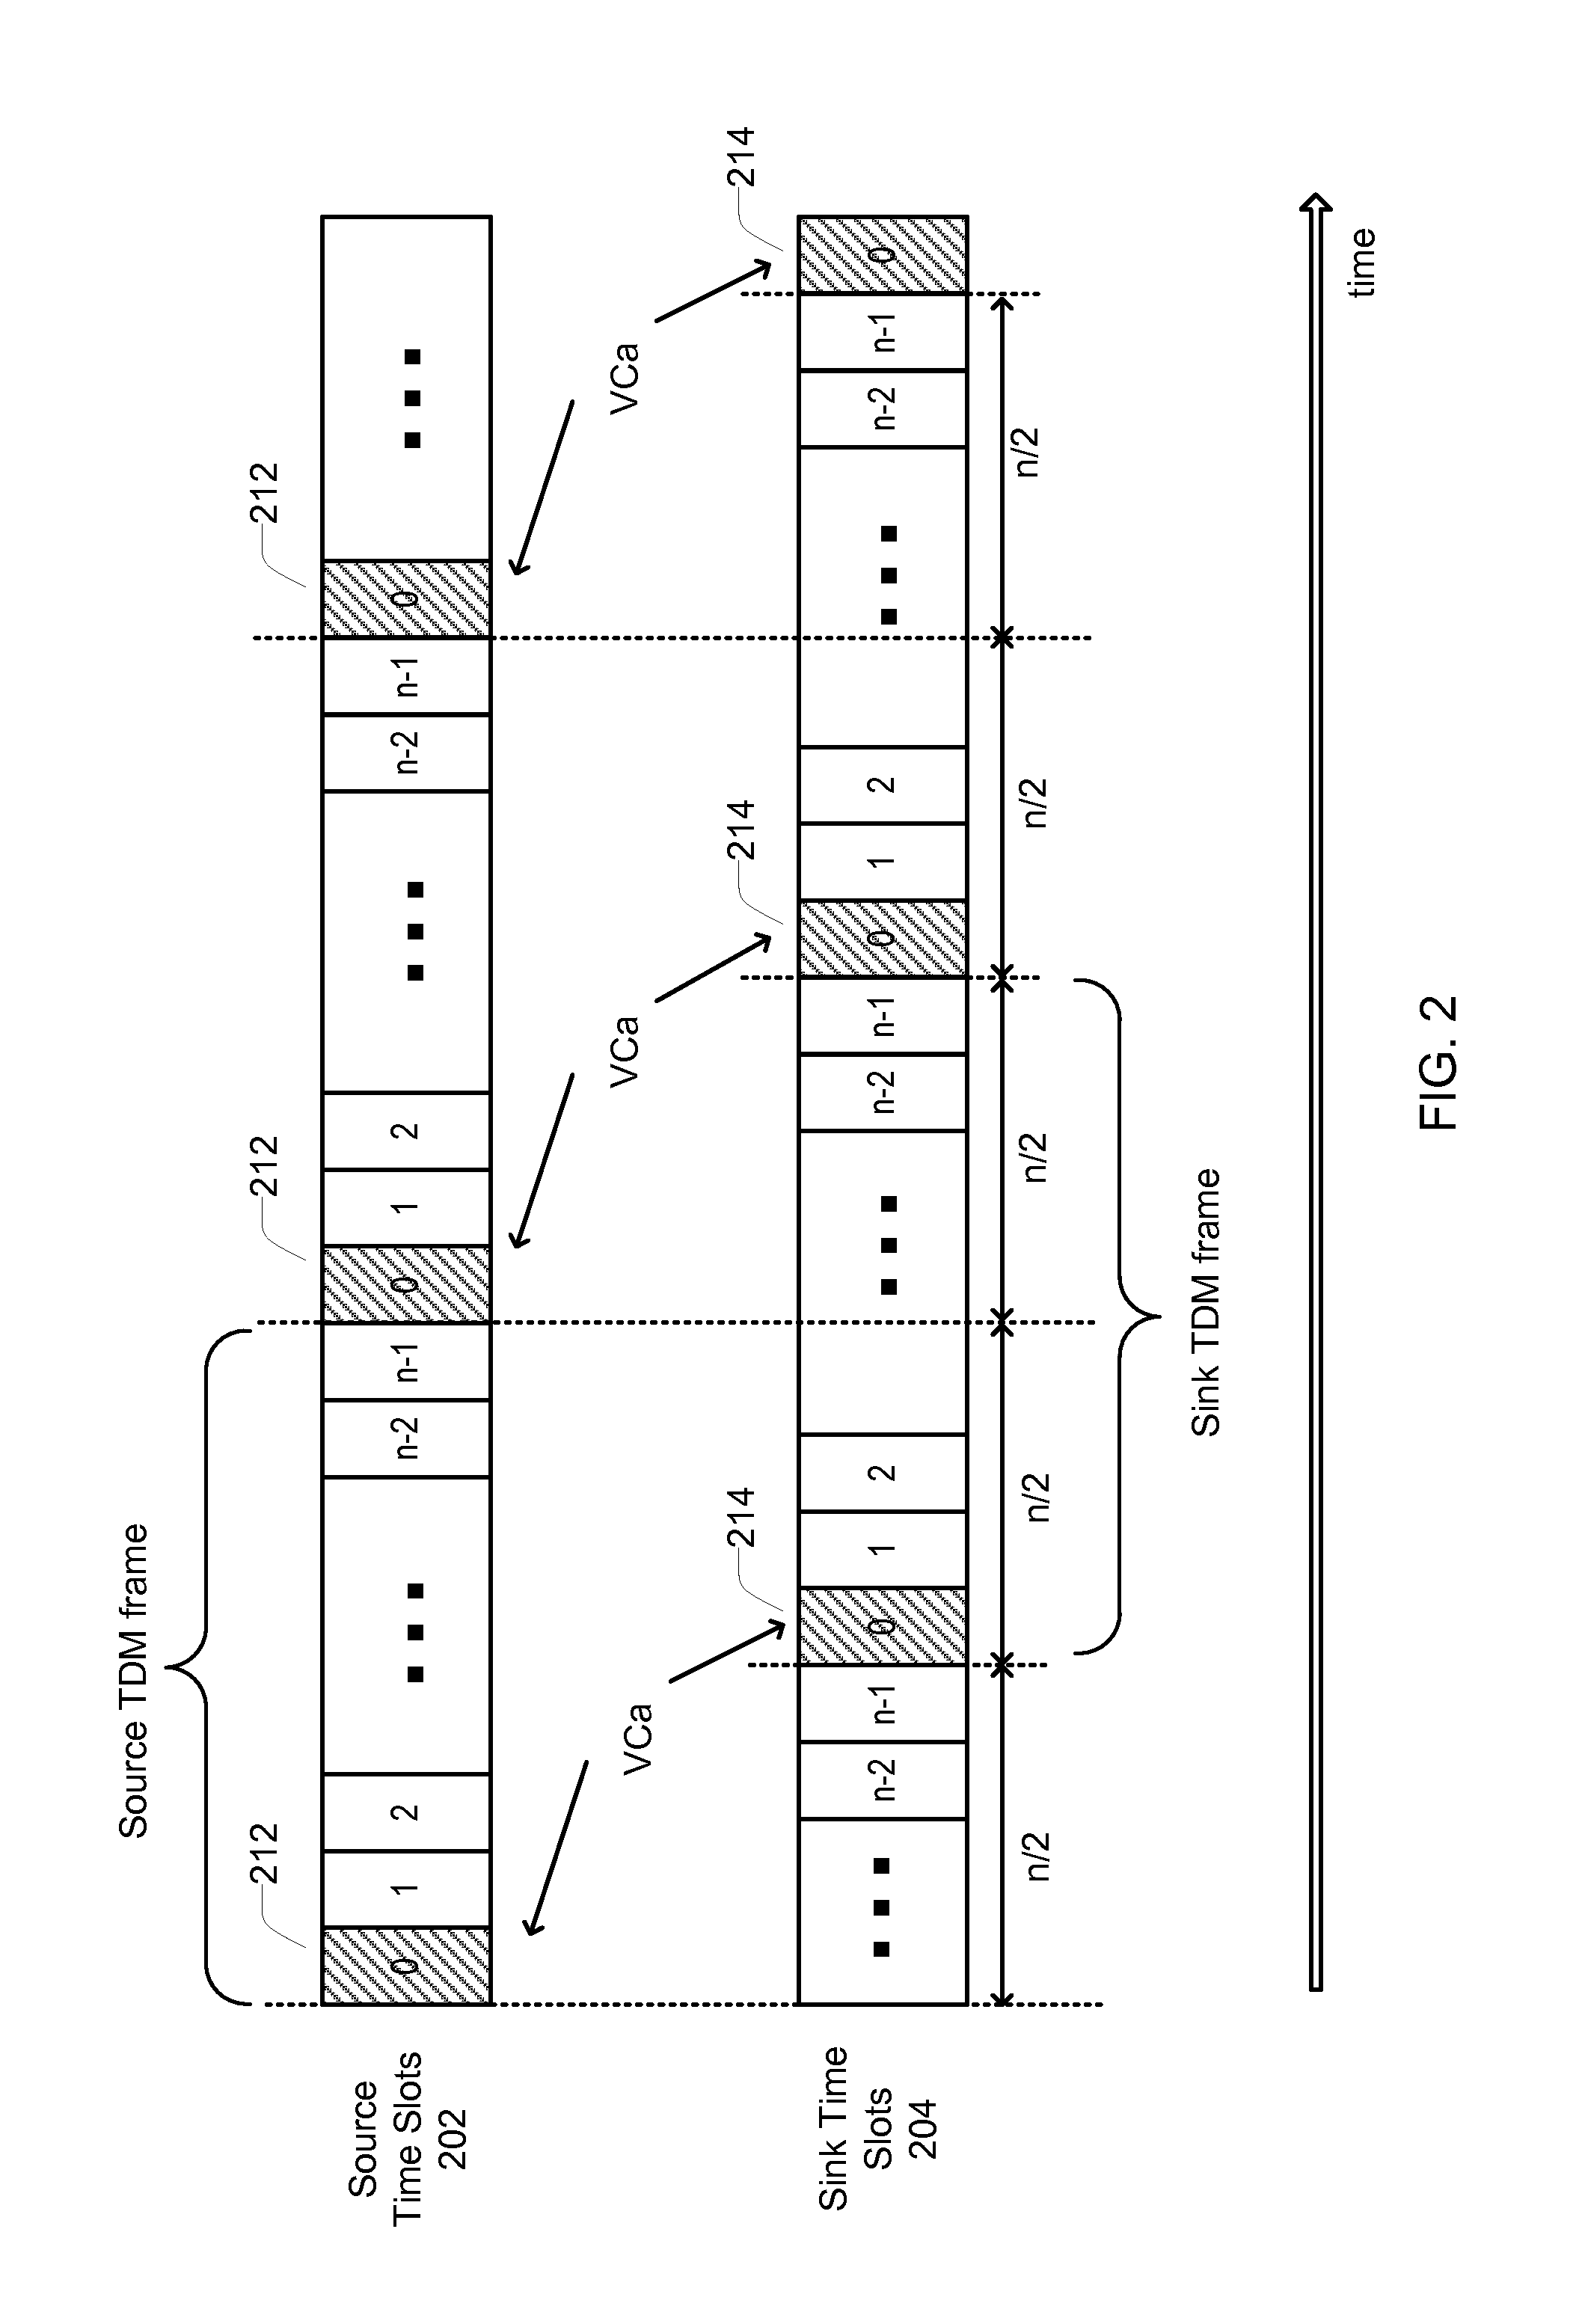 Phase Relationship Control for Control Channel of a Multimedia Communication Link